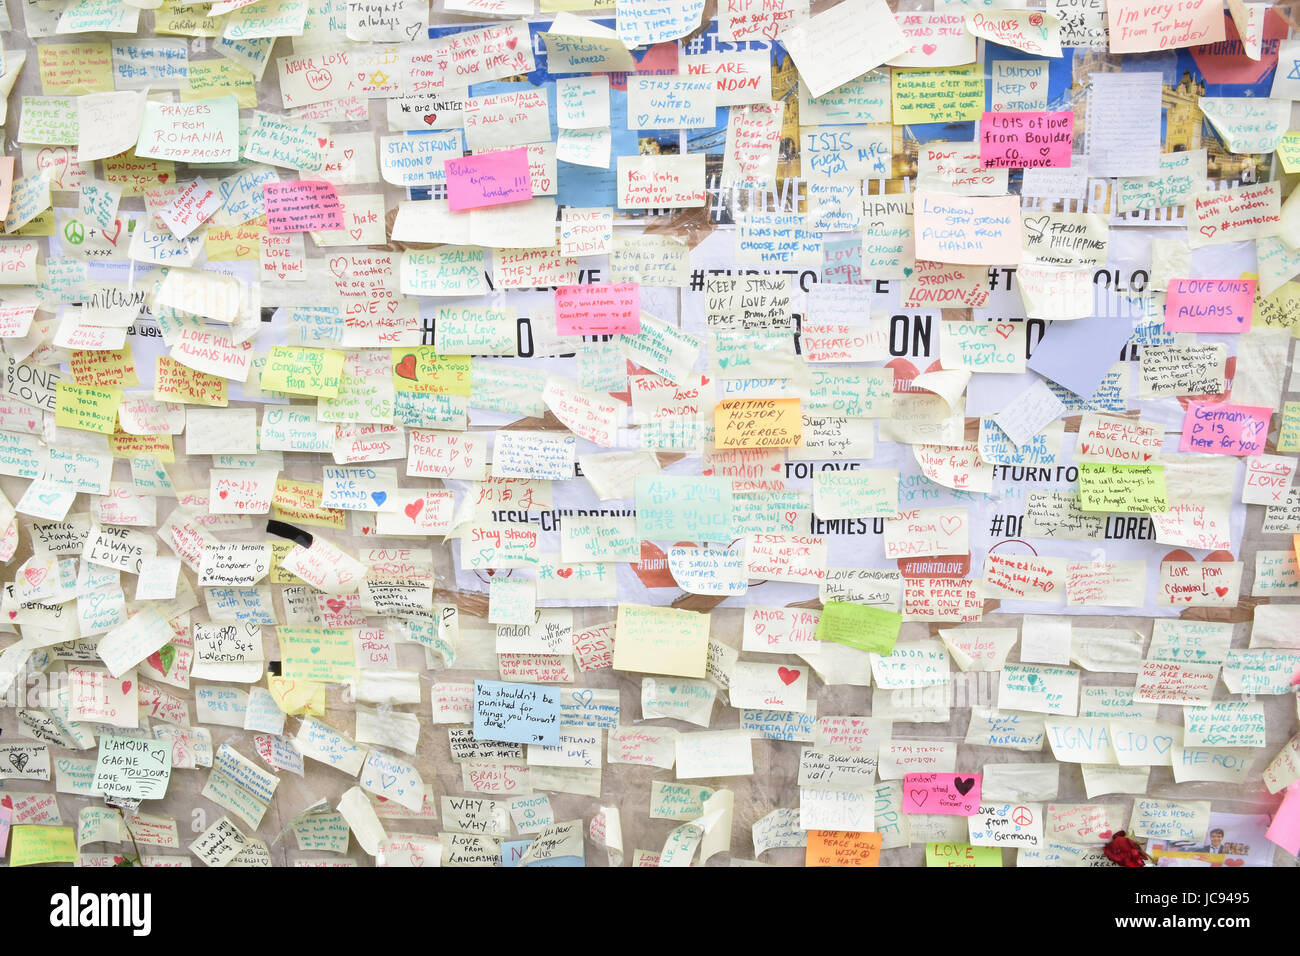 London Bridge Peace Wall,Hundreds of messages of peace were written on post it notes in the days following the London Bridge Terror Attack on 03.06.17. Stock Photo